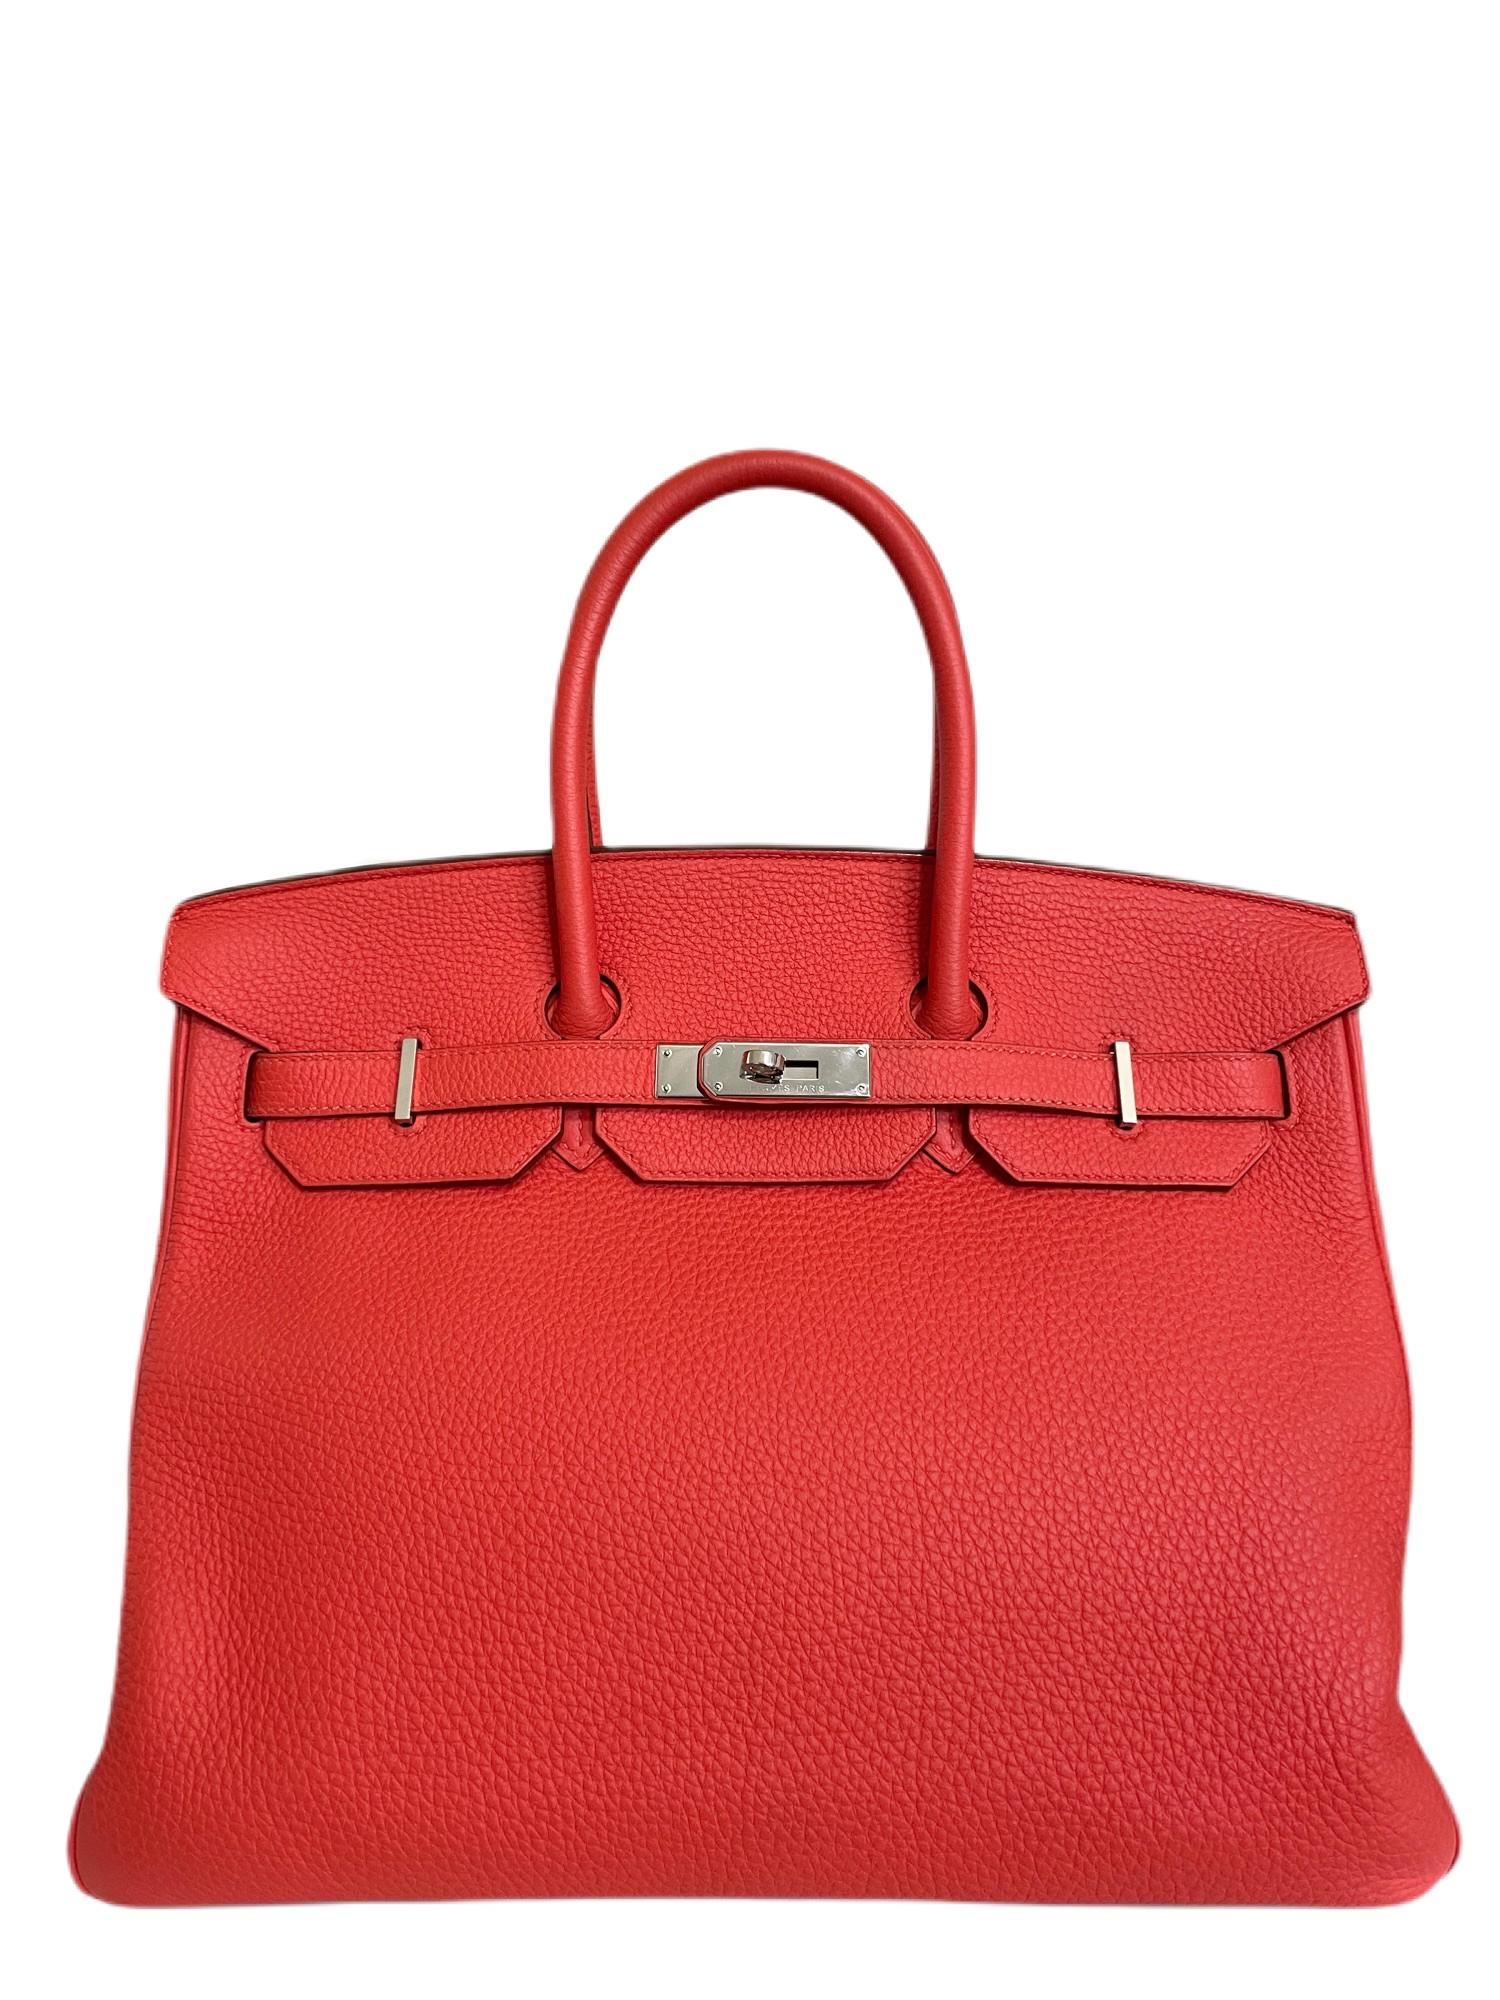 RARE HERMES BIRKIN ROSE JAIPUR PINK RED PALLADIUM HARDWARE. Excellent condition, Light hairlines on hardware perfect corners and Buttery structure. 

Shop with Confidence from Lux Addicts. Authenticity Guaranteed!